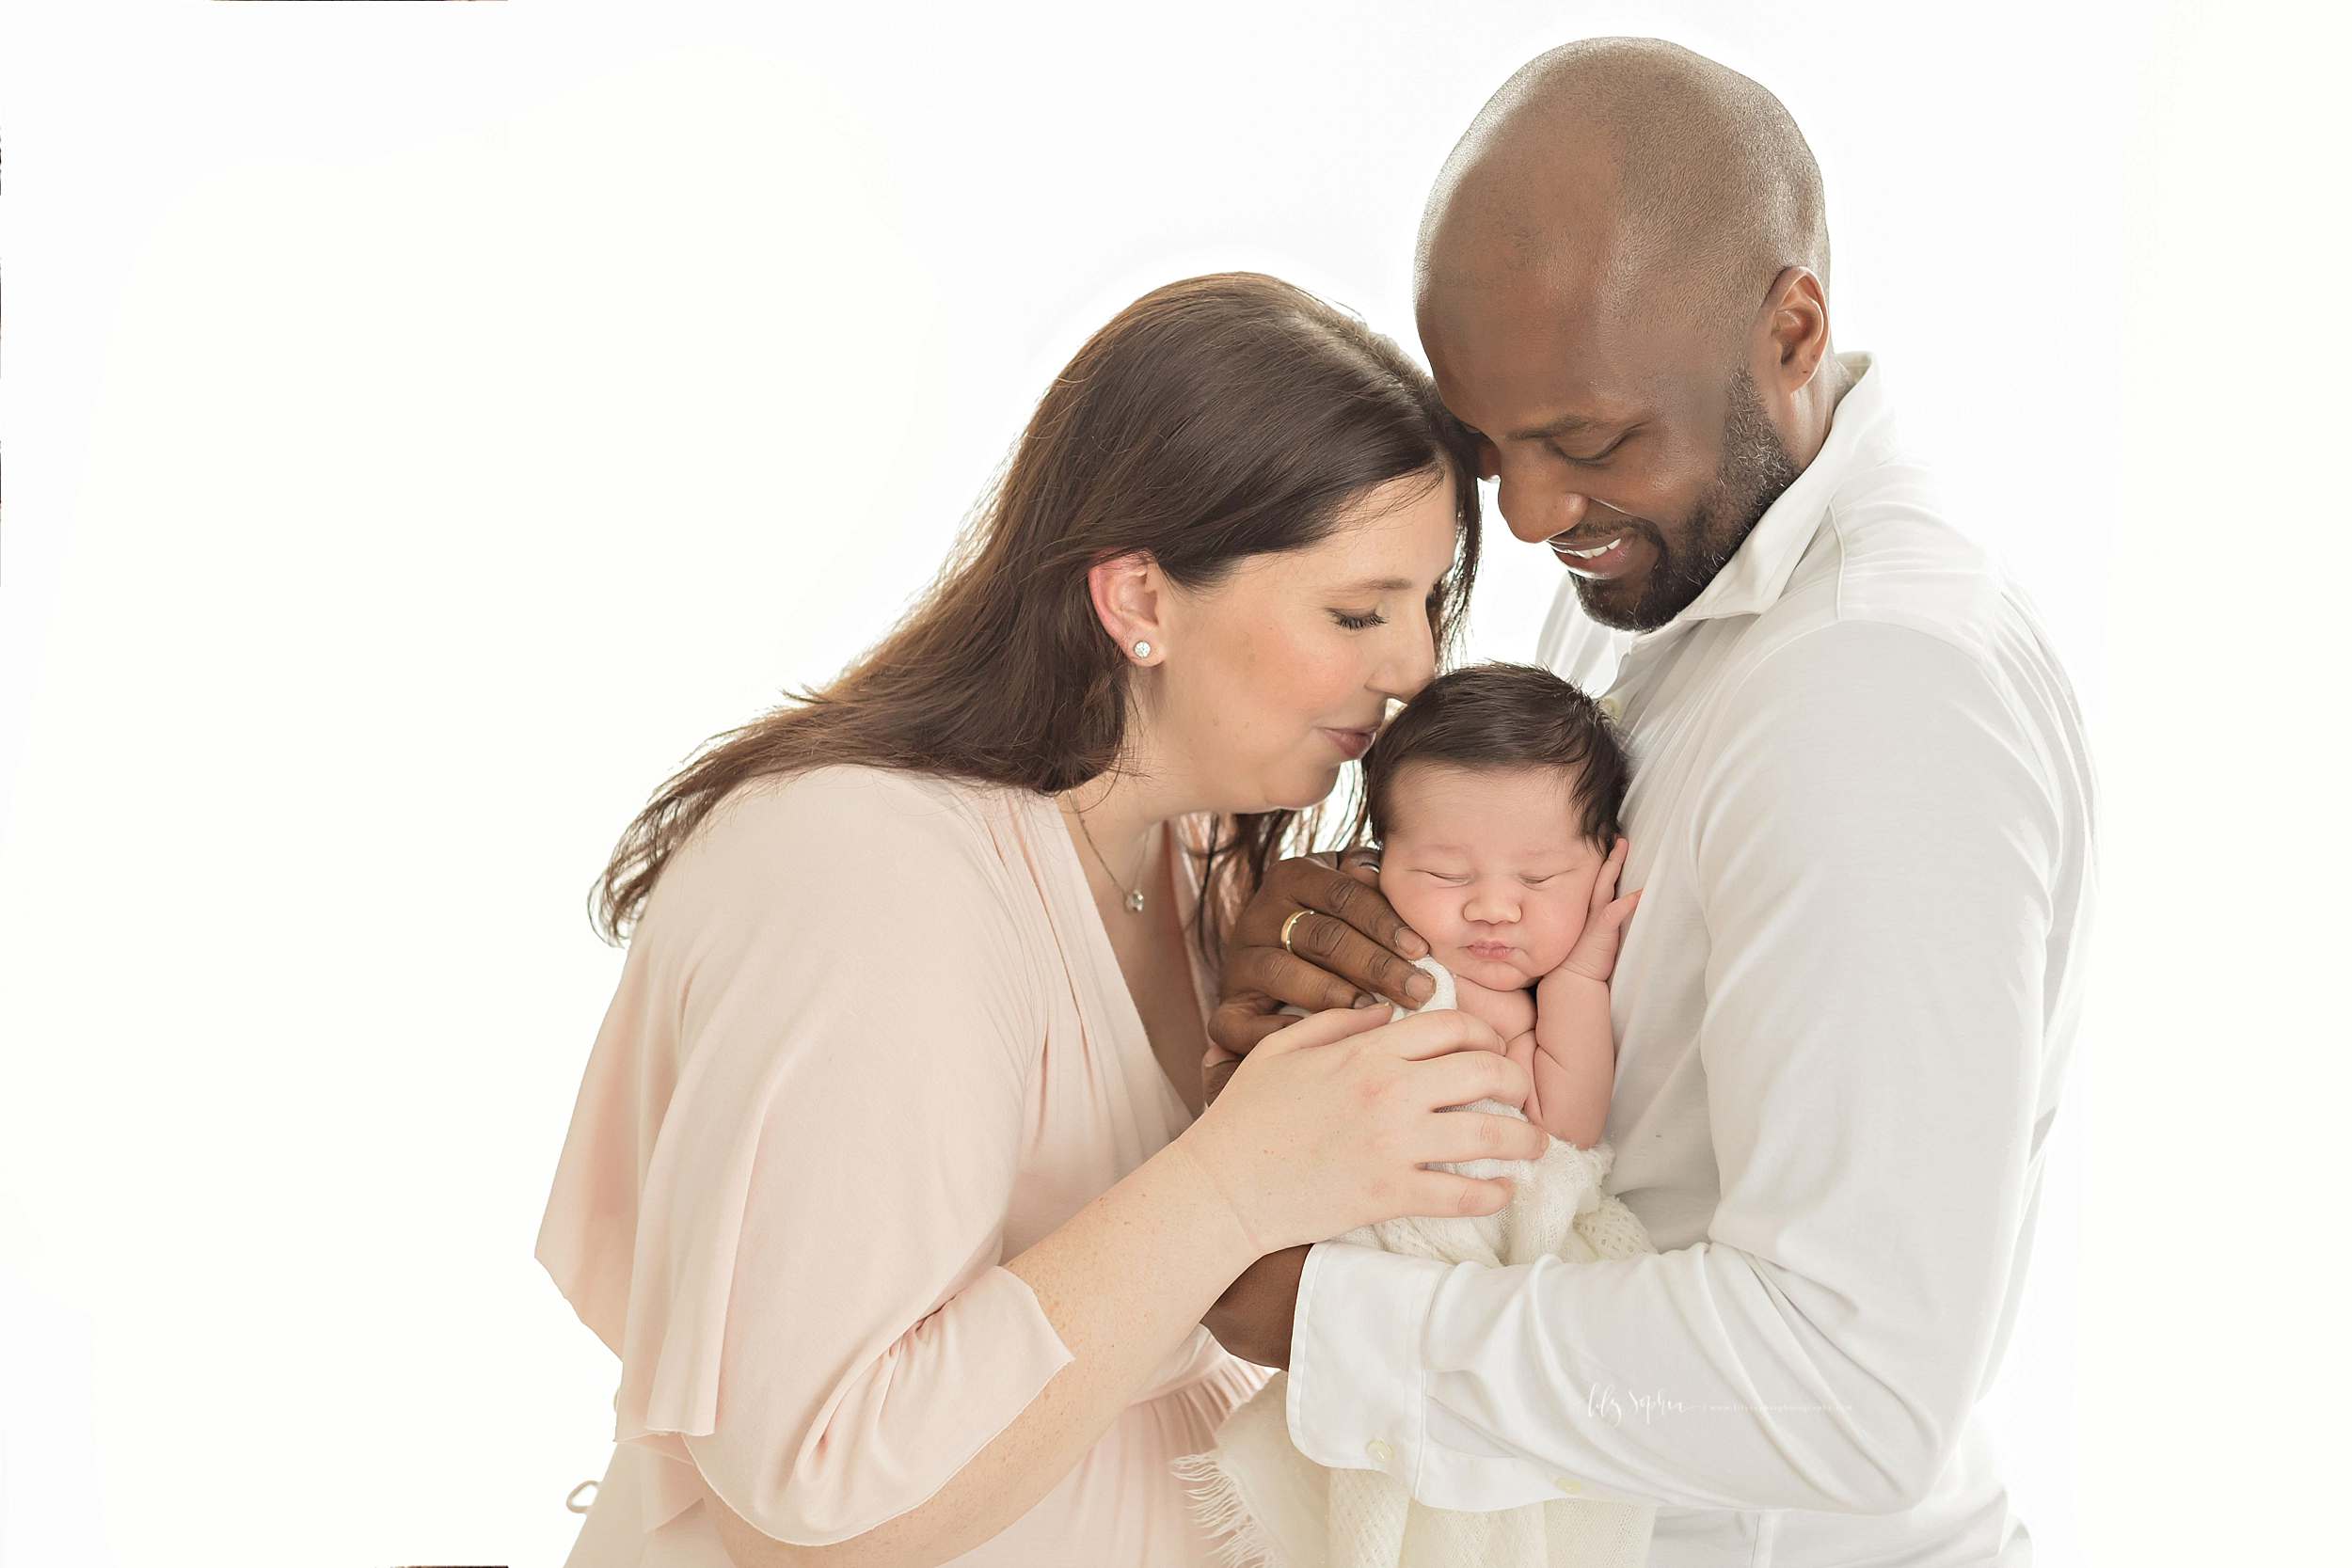 atlanta-buckhead-brookhaven-poncey-highlands-decatur-lily-sophia-photography-maternity-pregnancy-photographer-portraits-grant-park-intown-african-american-parents-biracial-baby-boy_0795.jpg